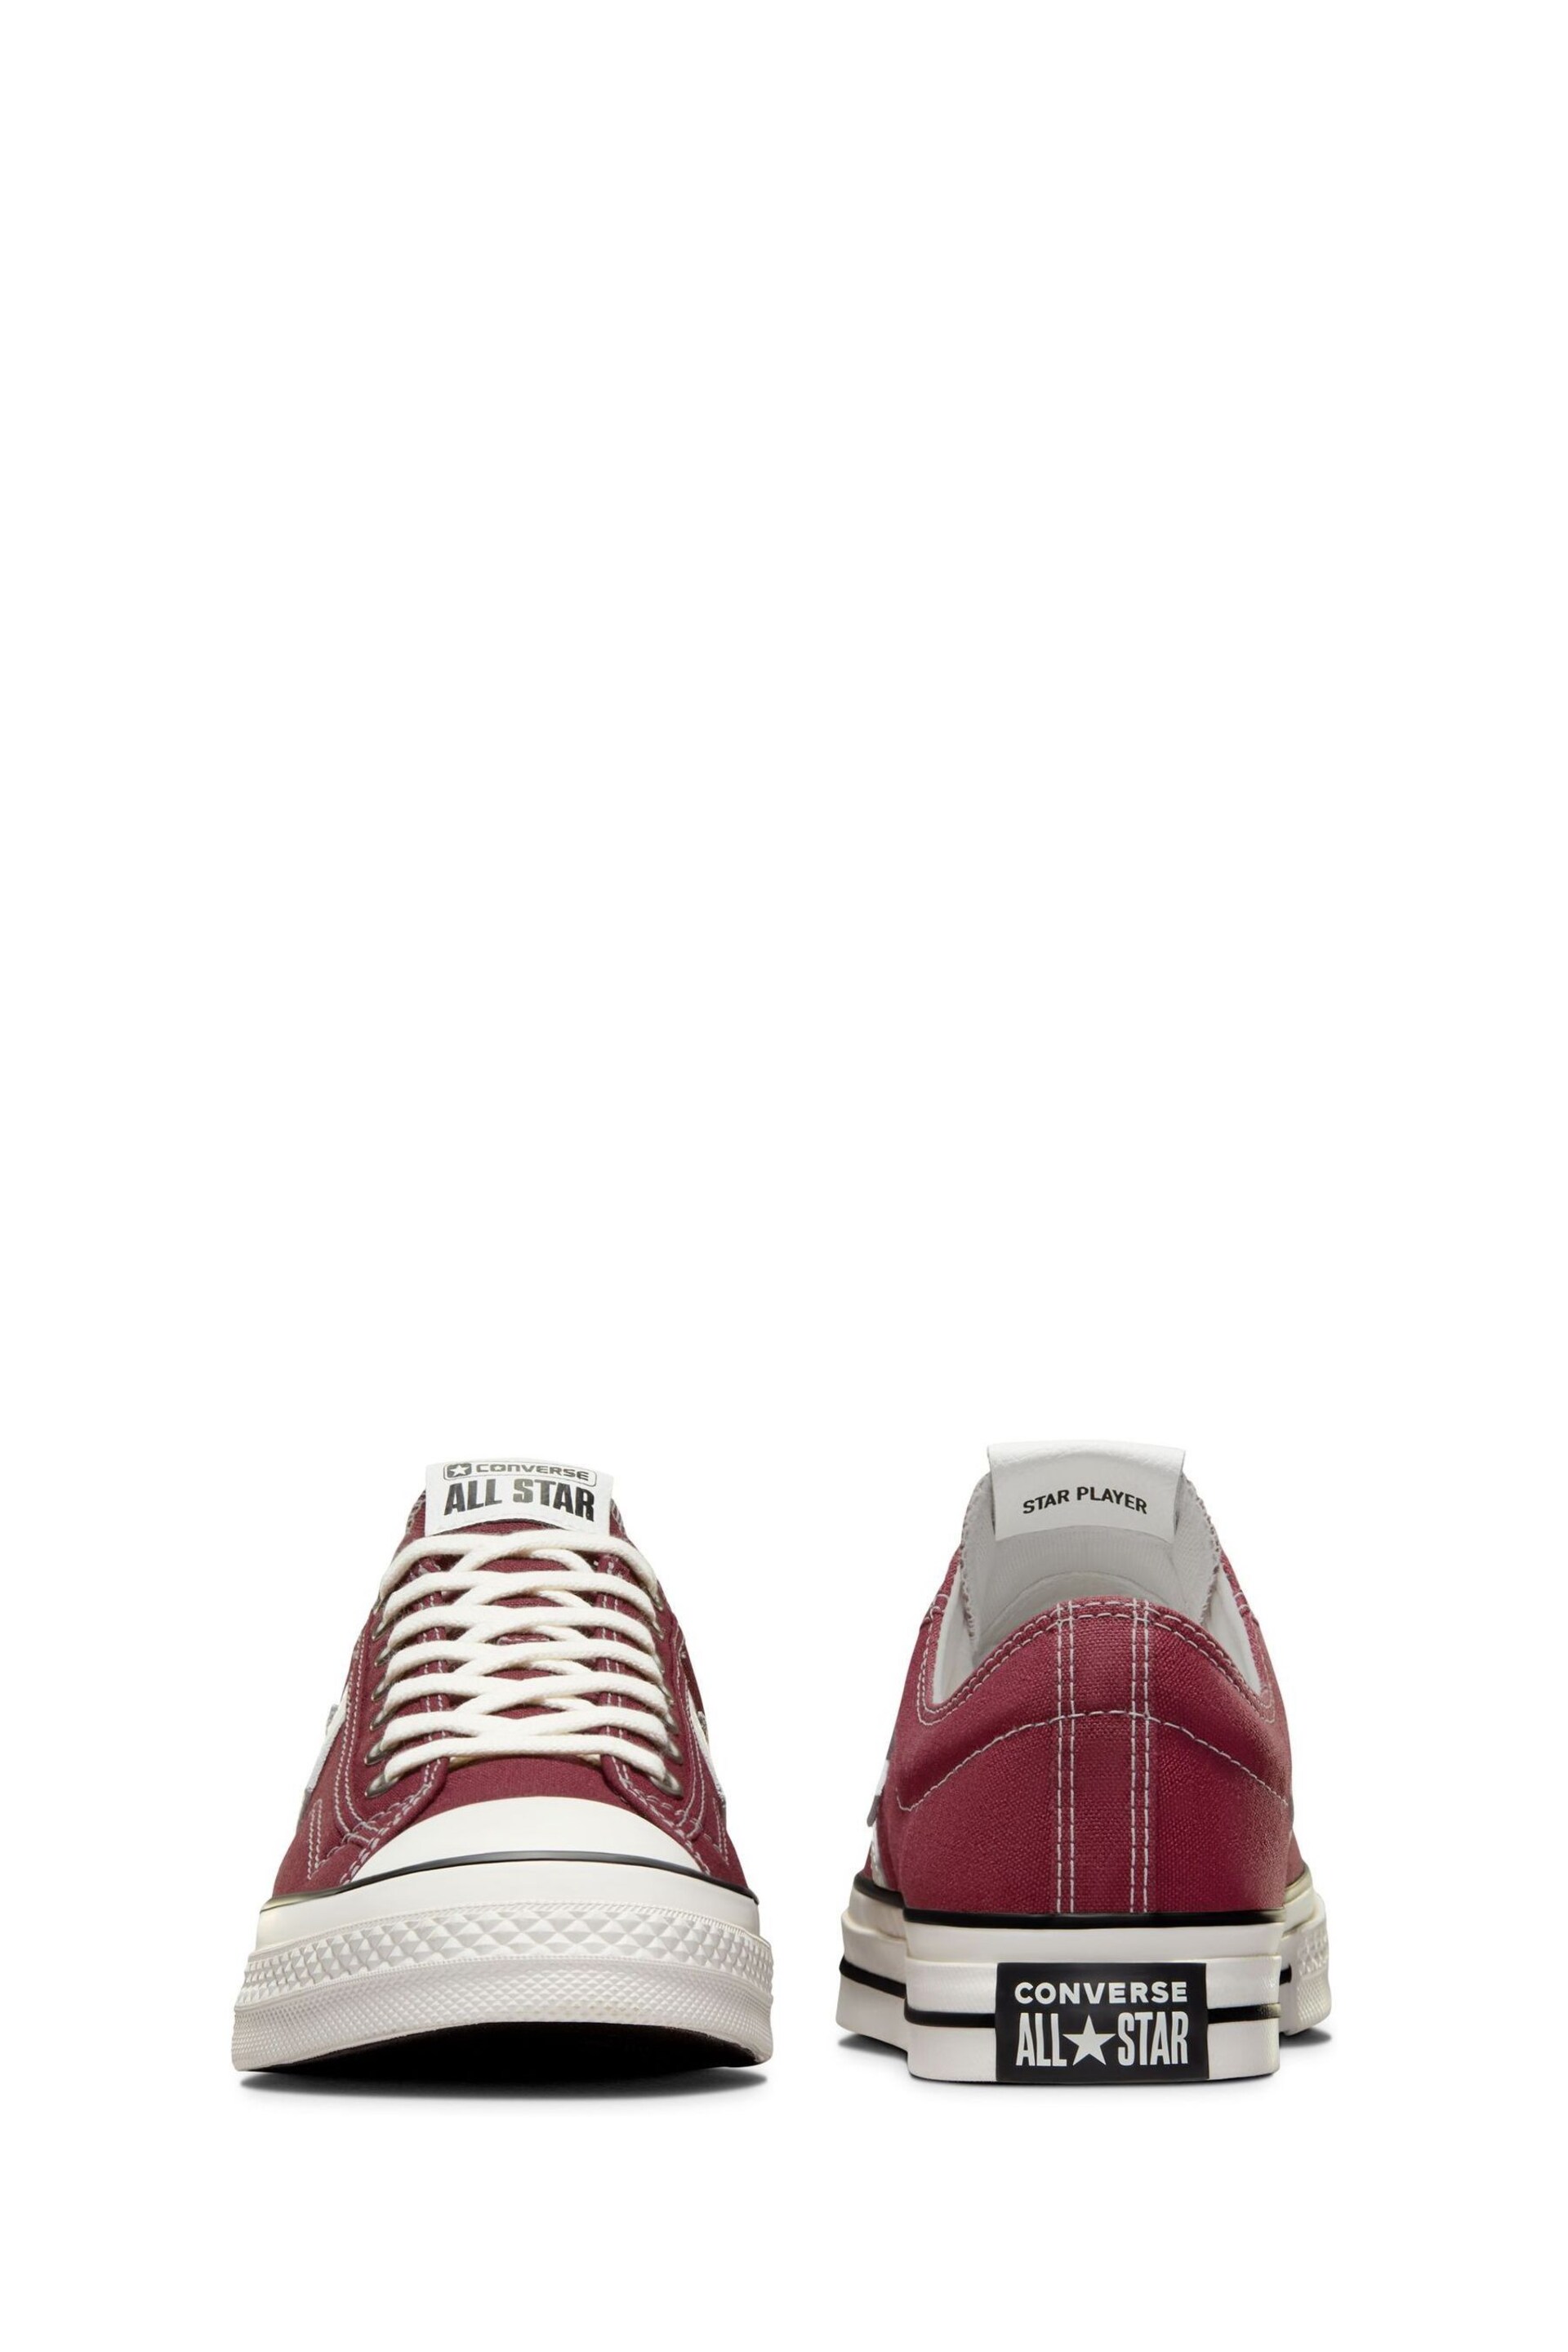 Converse Red Star Player 76 Low Trainers - Image 4 of 7